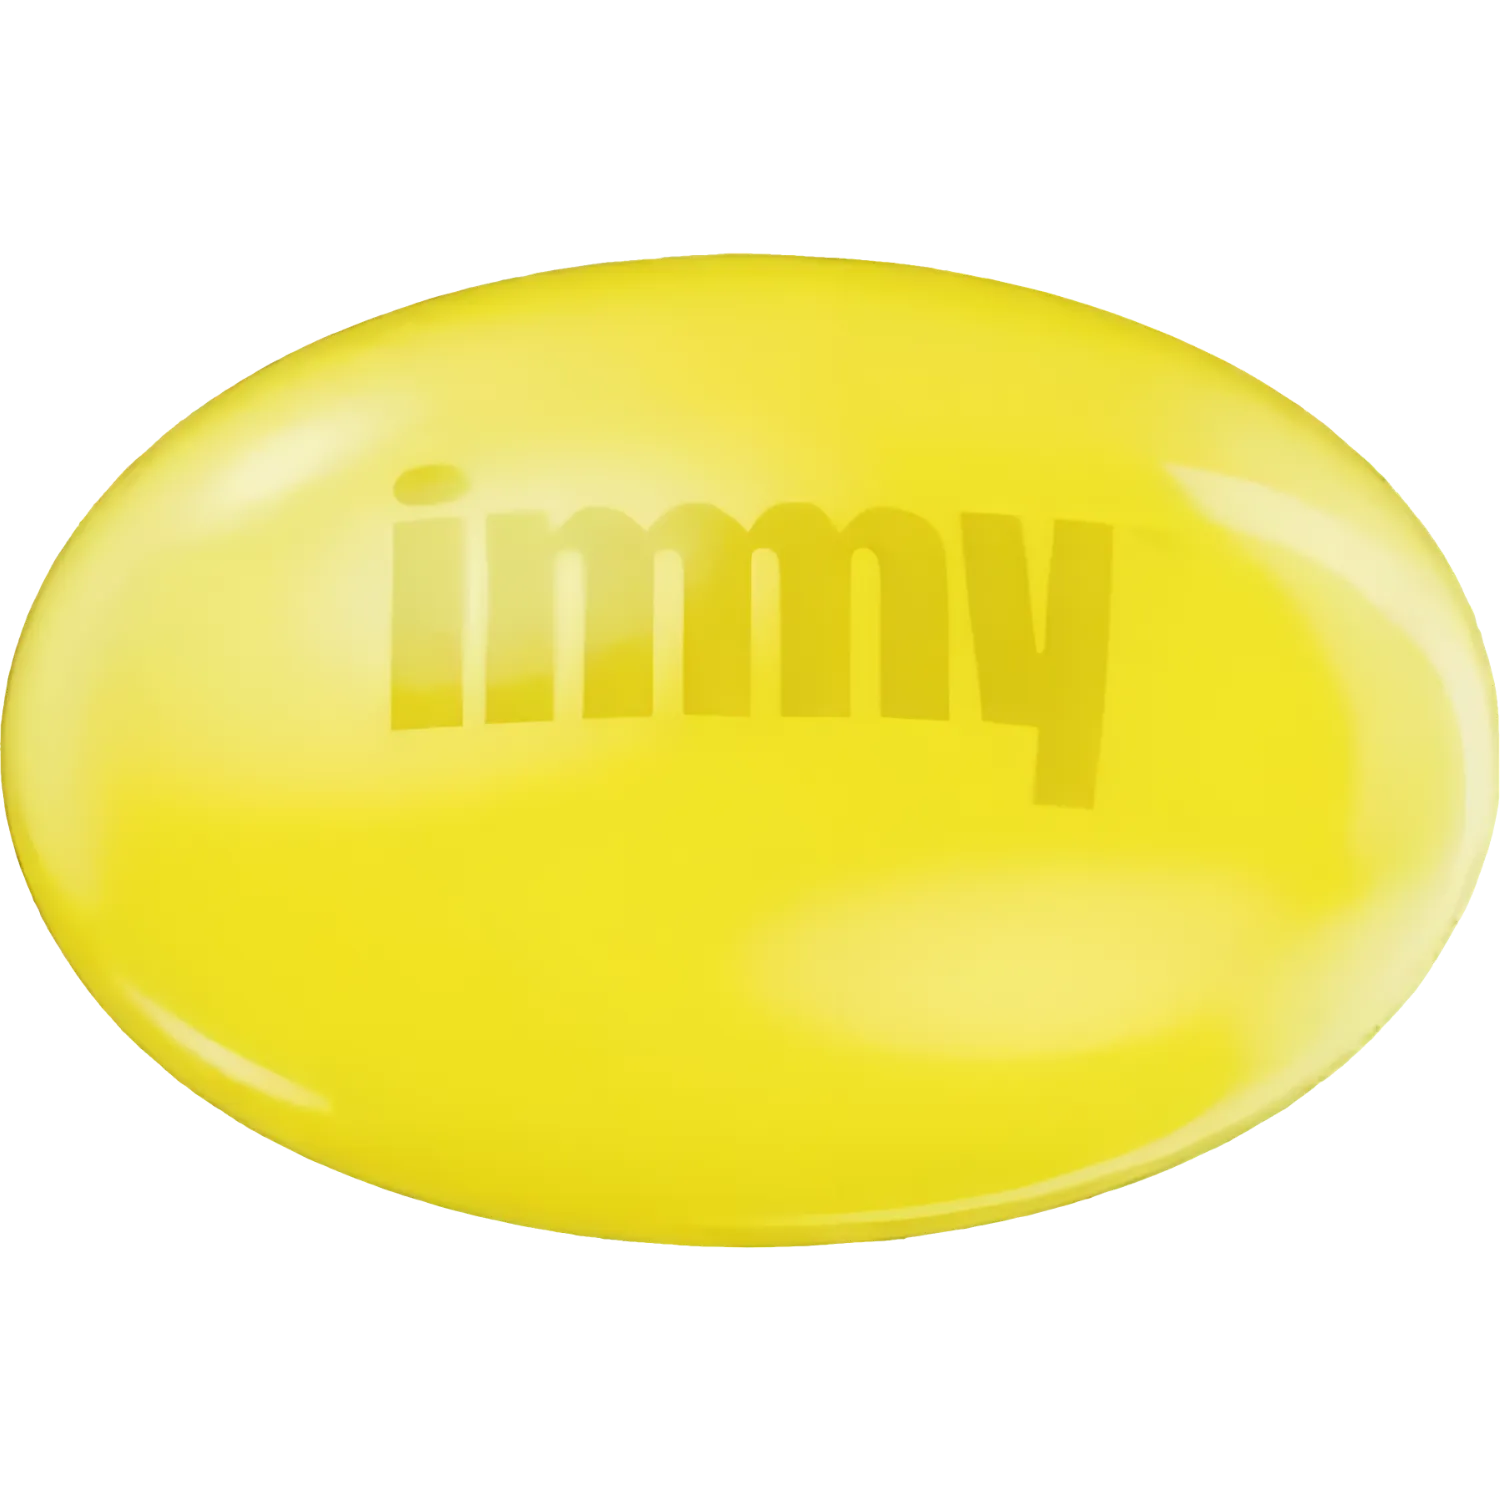 Free Immy Immune System Supplement Capsule